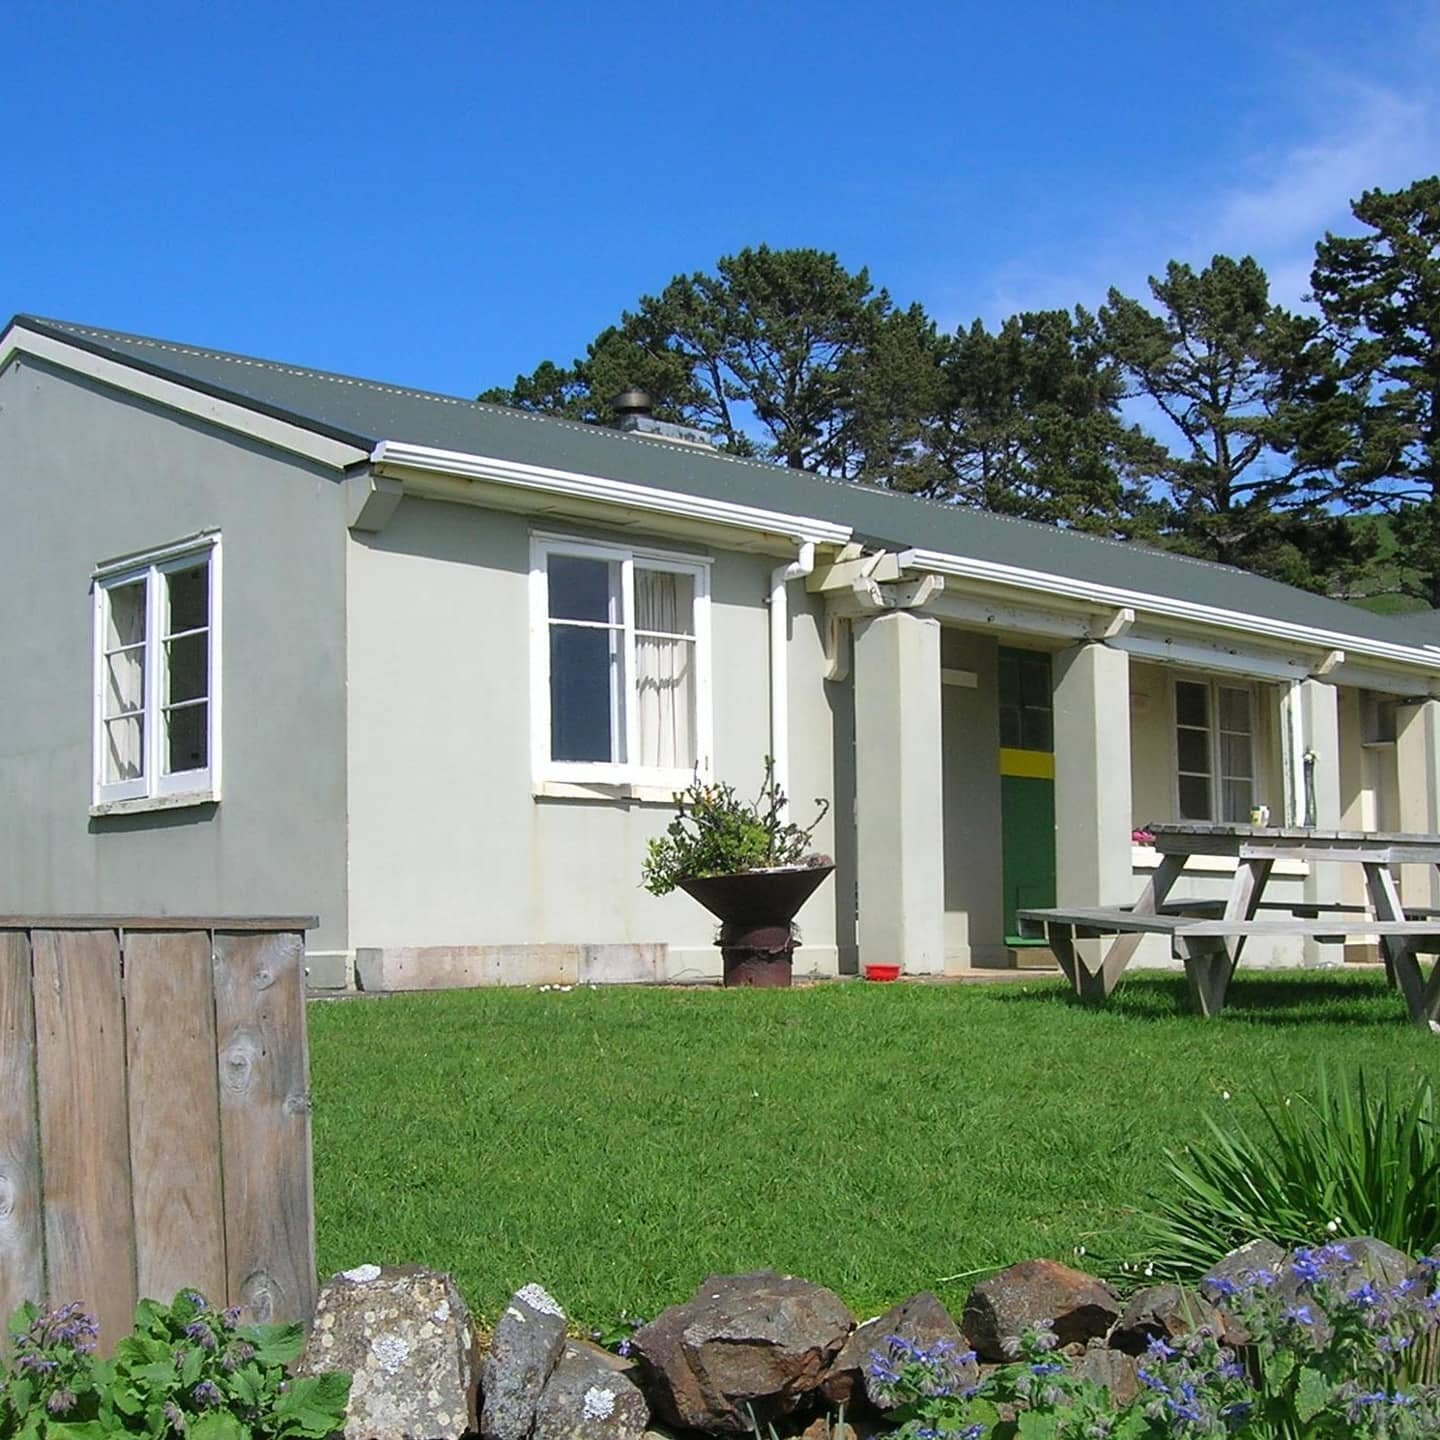 Book your next holiday now with us. 30 minutes away from Downtown Auckland. Absolute Beachfront. Sleeps up to ten people from $55 per night. Dont delay book ahead to secure key dates that work for you.